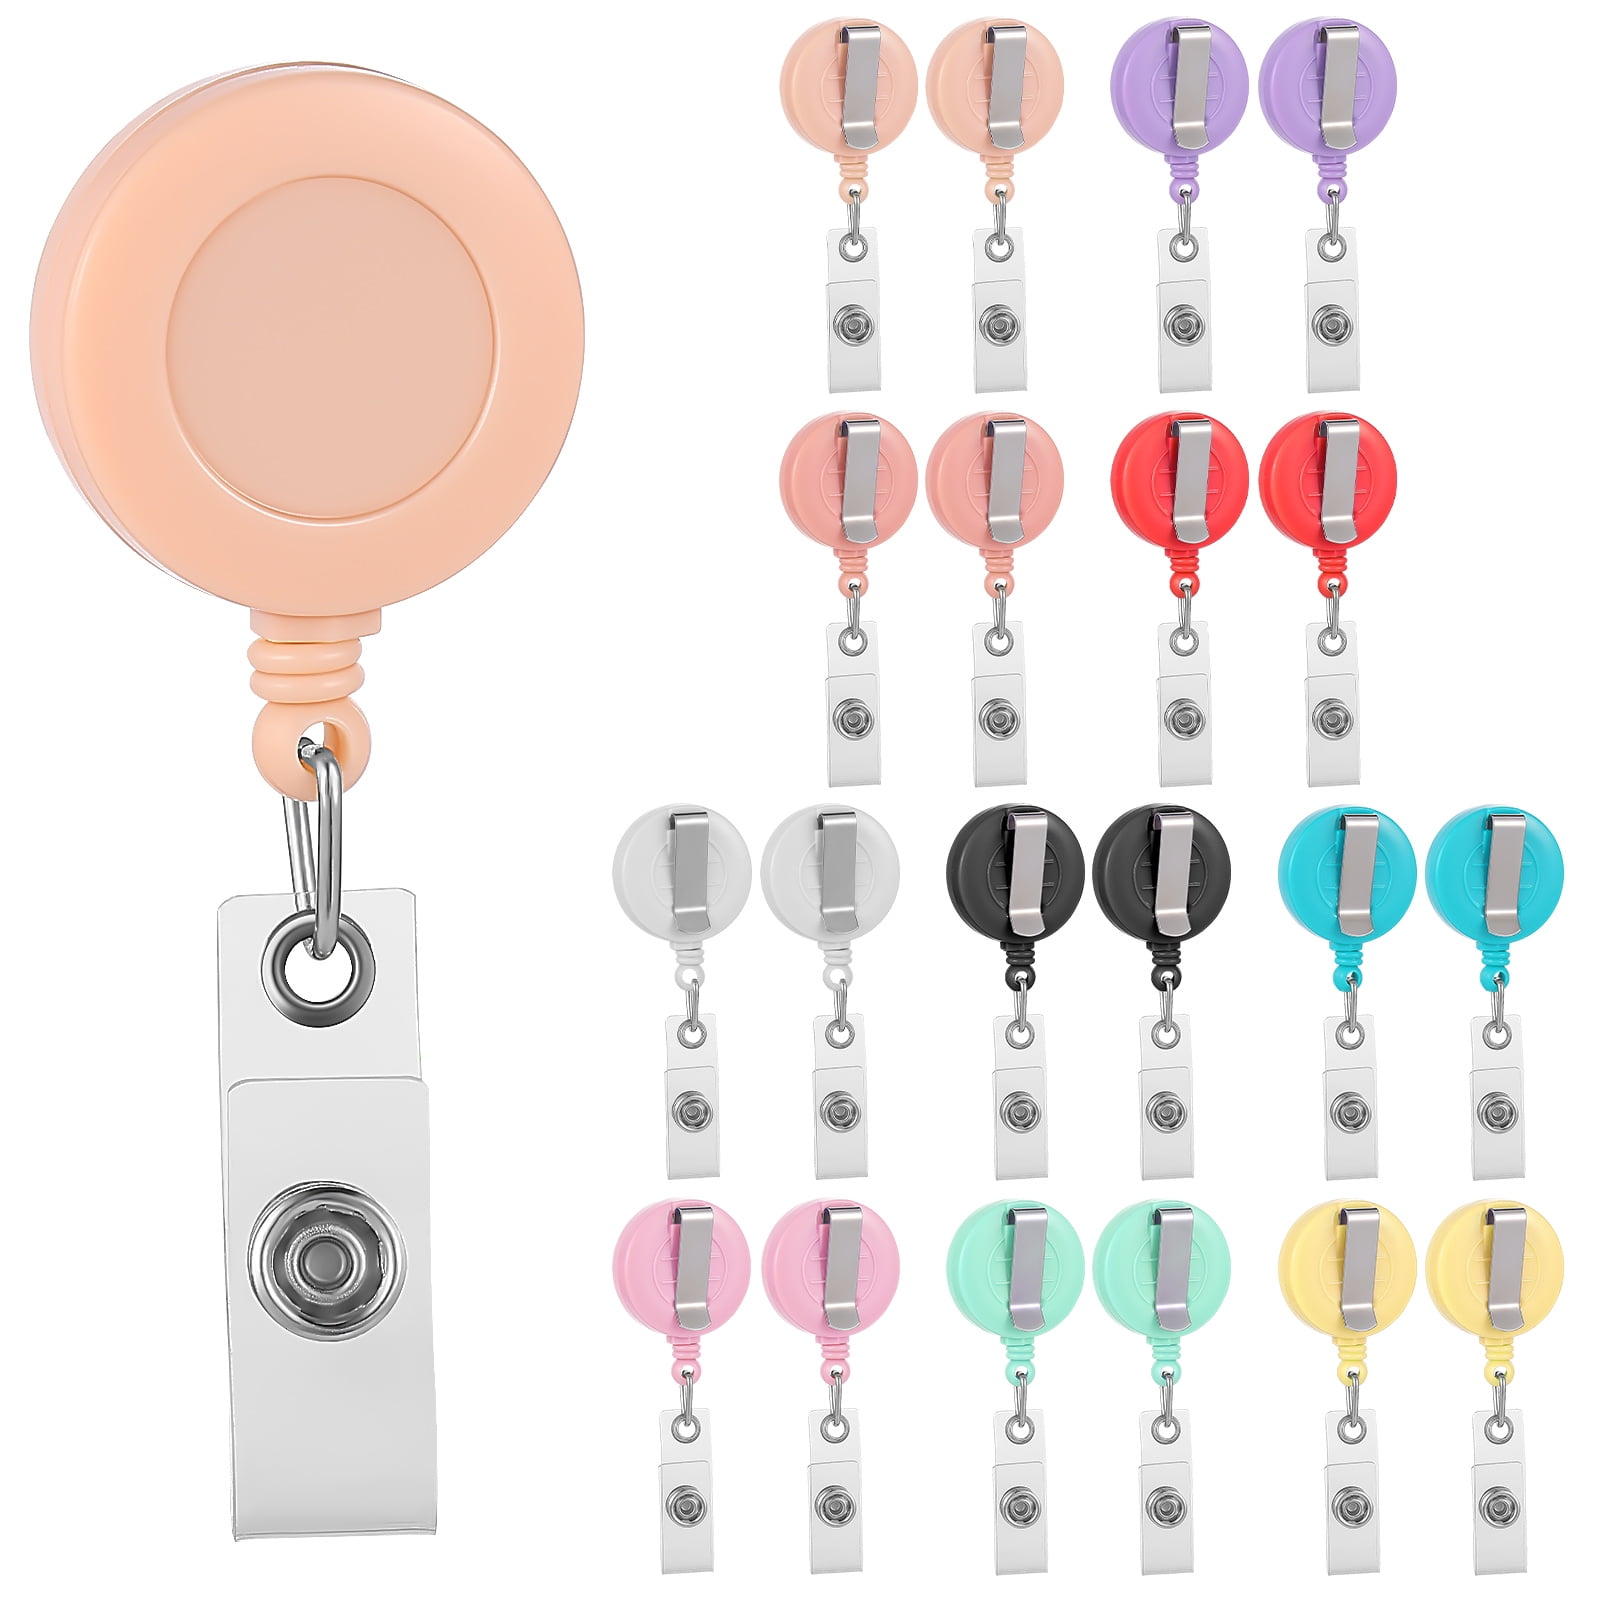 Min Pin Valentines Love and Hearts Retractable Badge Reel or ID